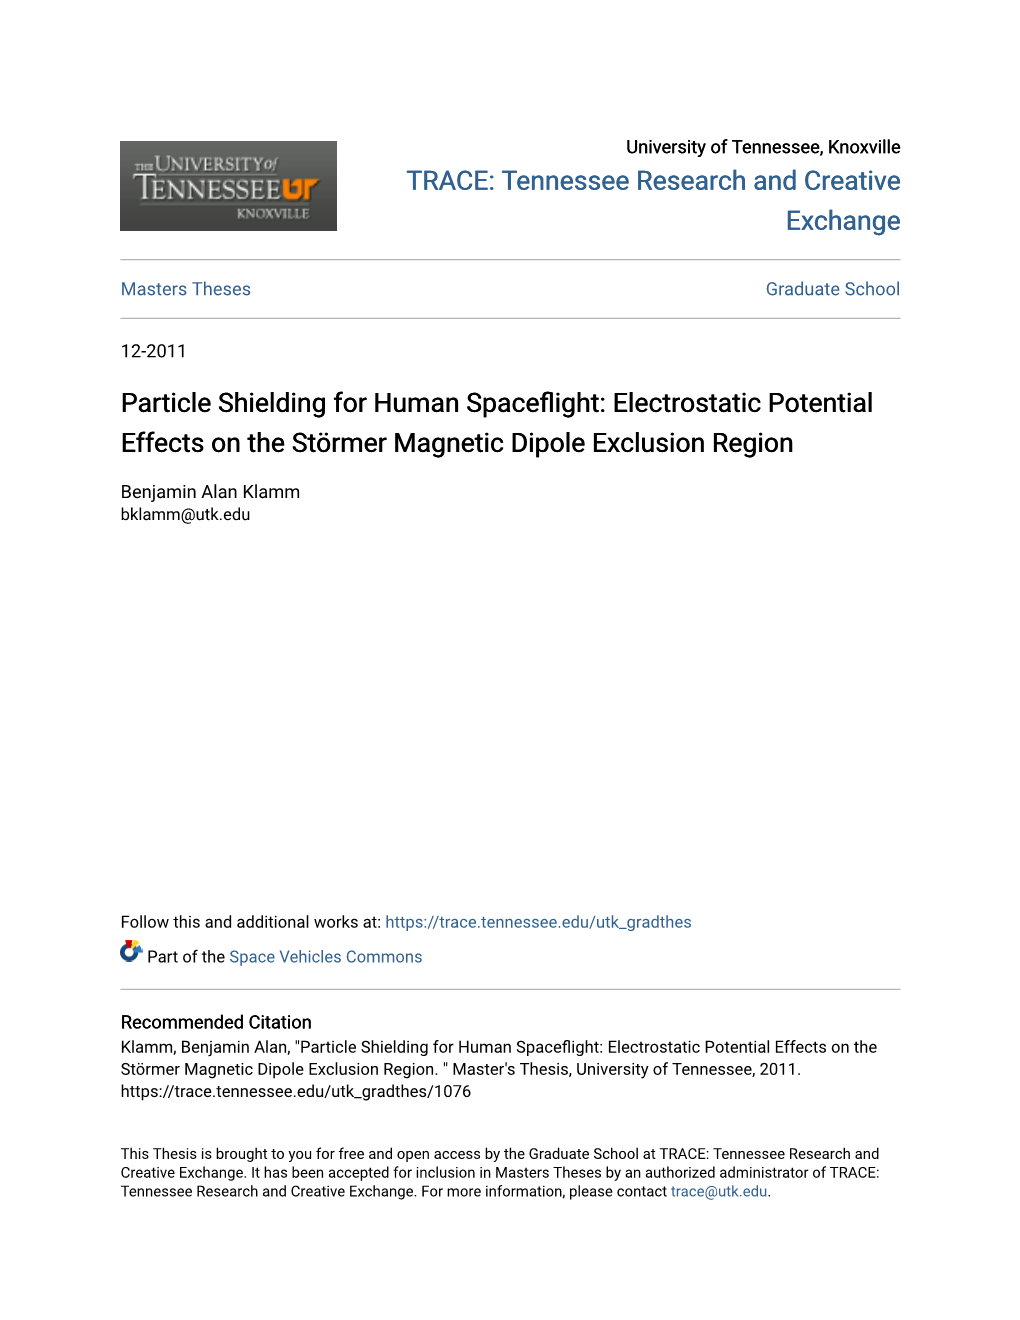 Electrostatic Potential Effects on the Störmer Magnetic Dipole Exclusion Region